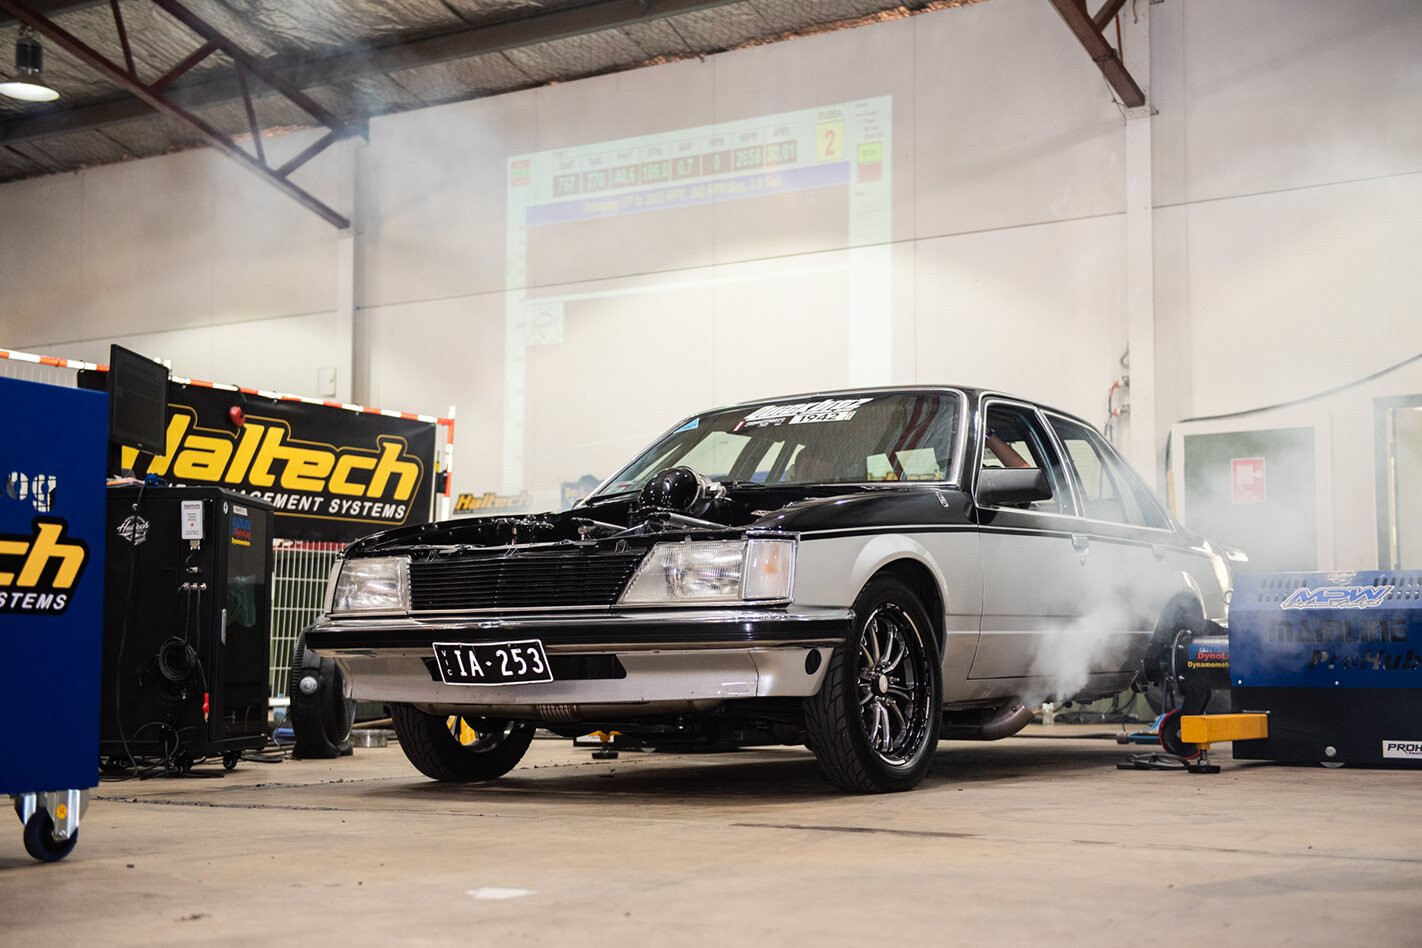 Bubba’s Commodore wins Horsepower Heroes with 2483hp at the hubs